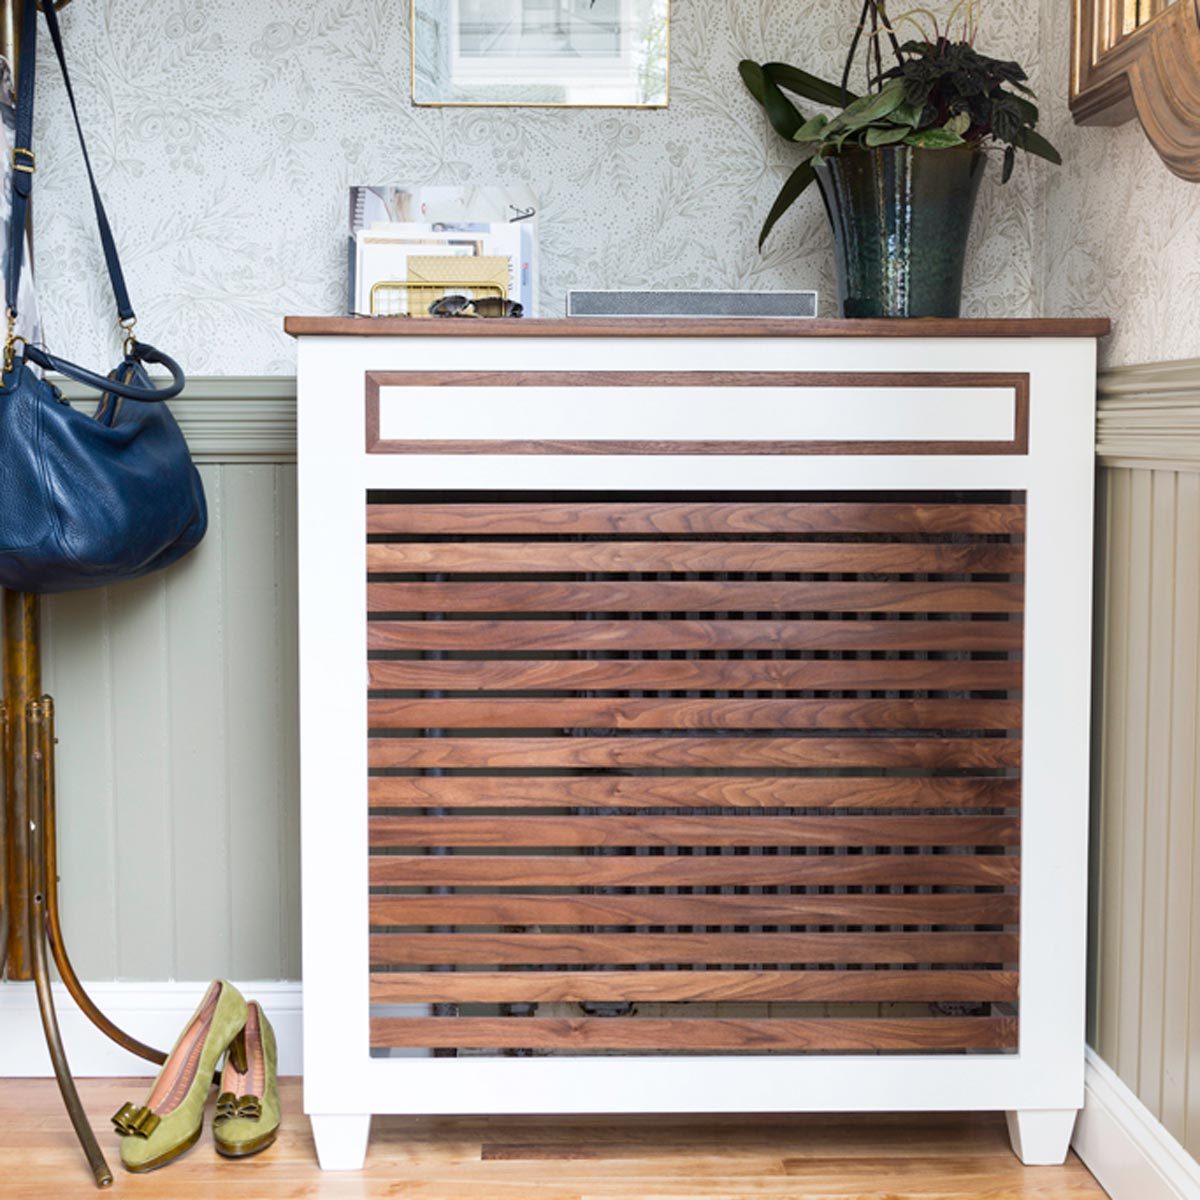 Hide Ugly Radiators With These Stylish Cover Ideas